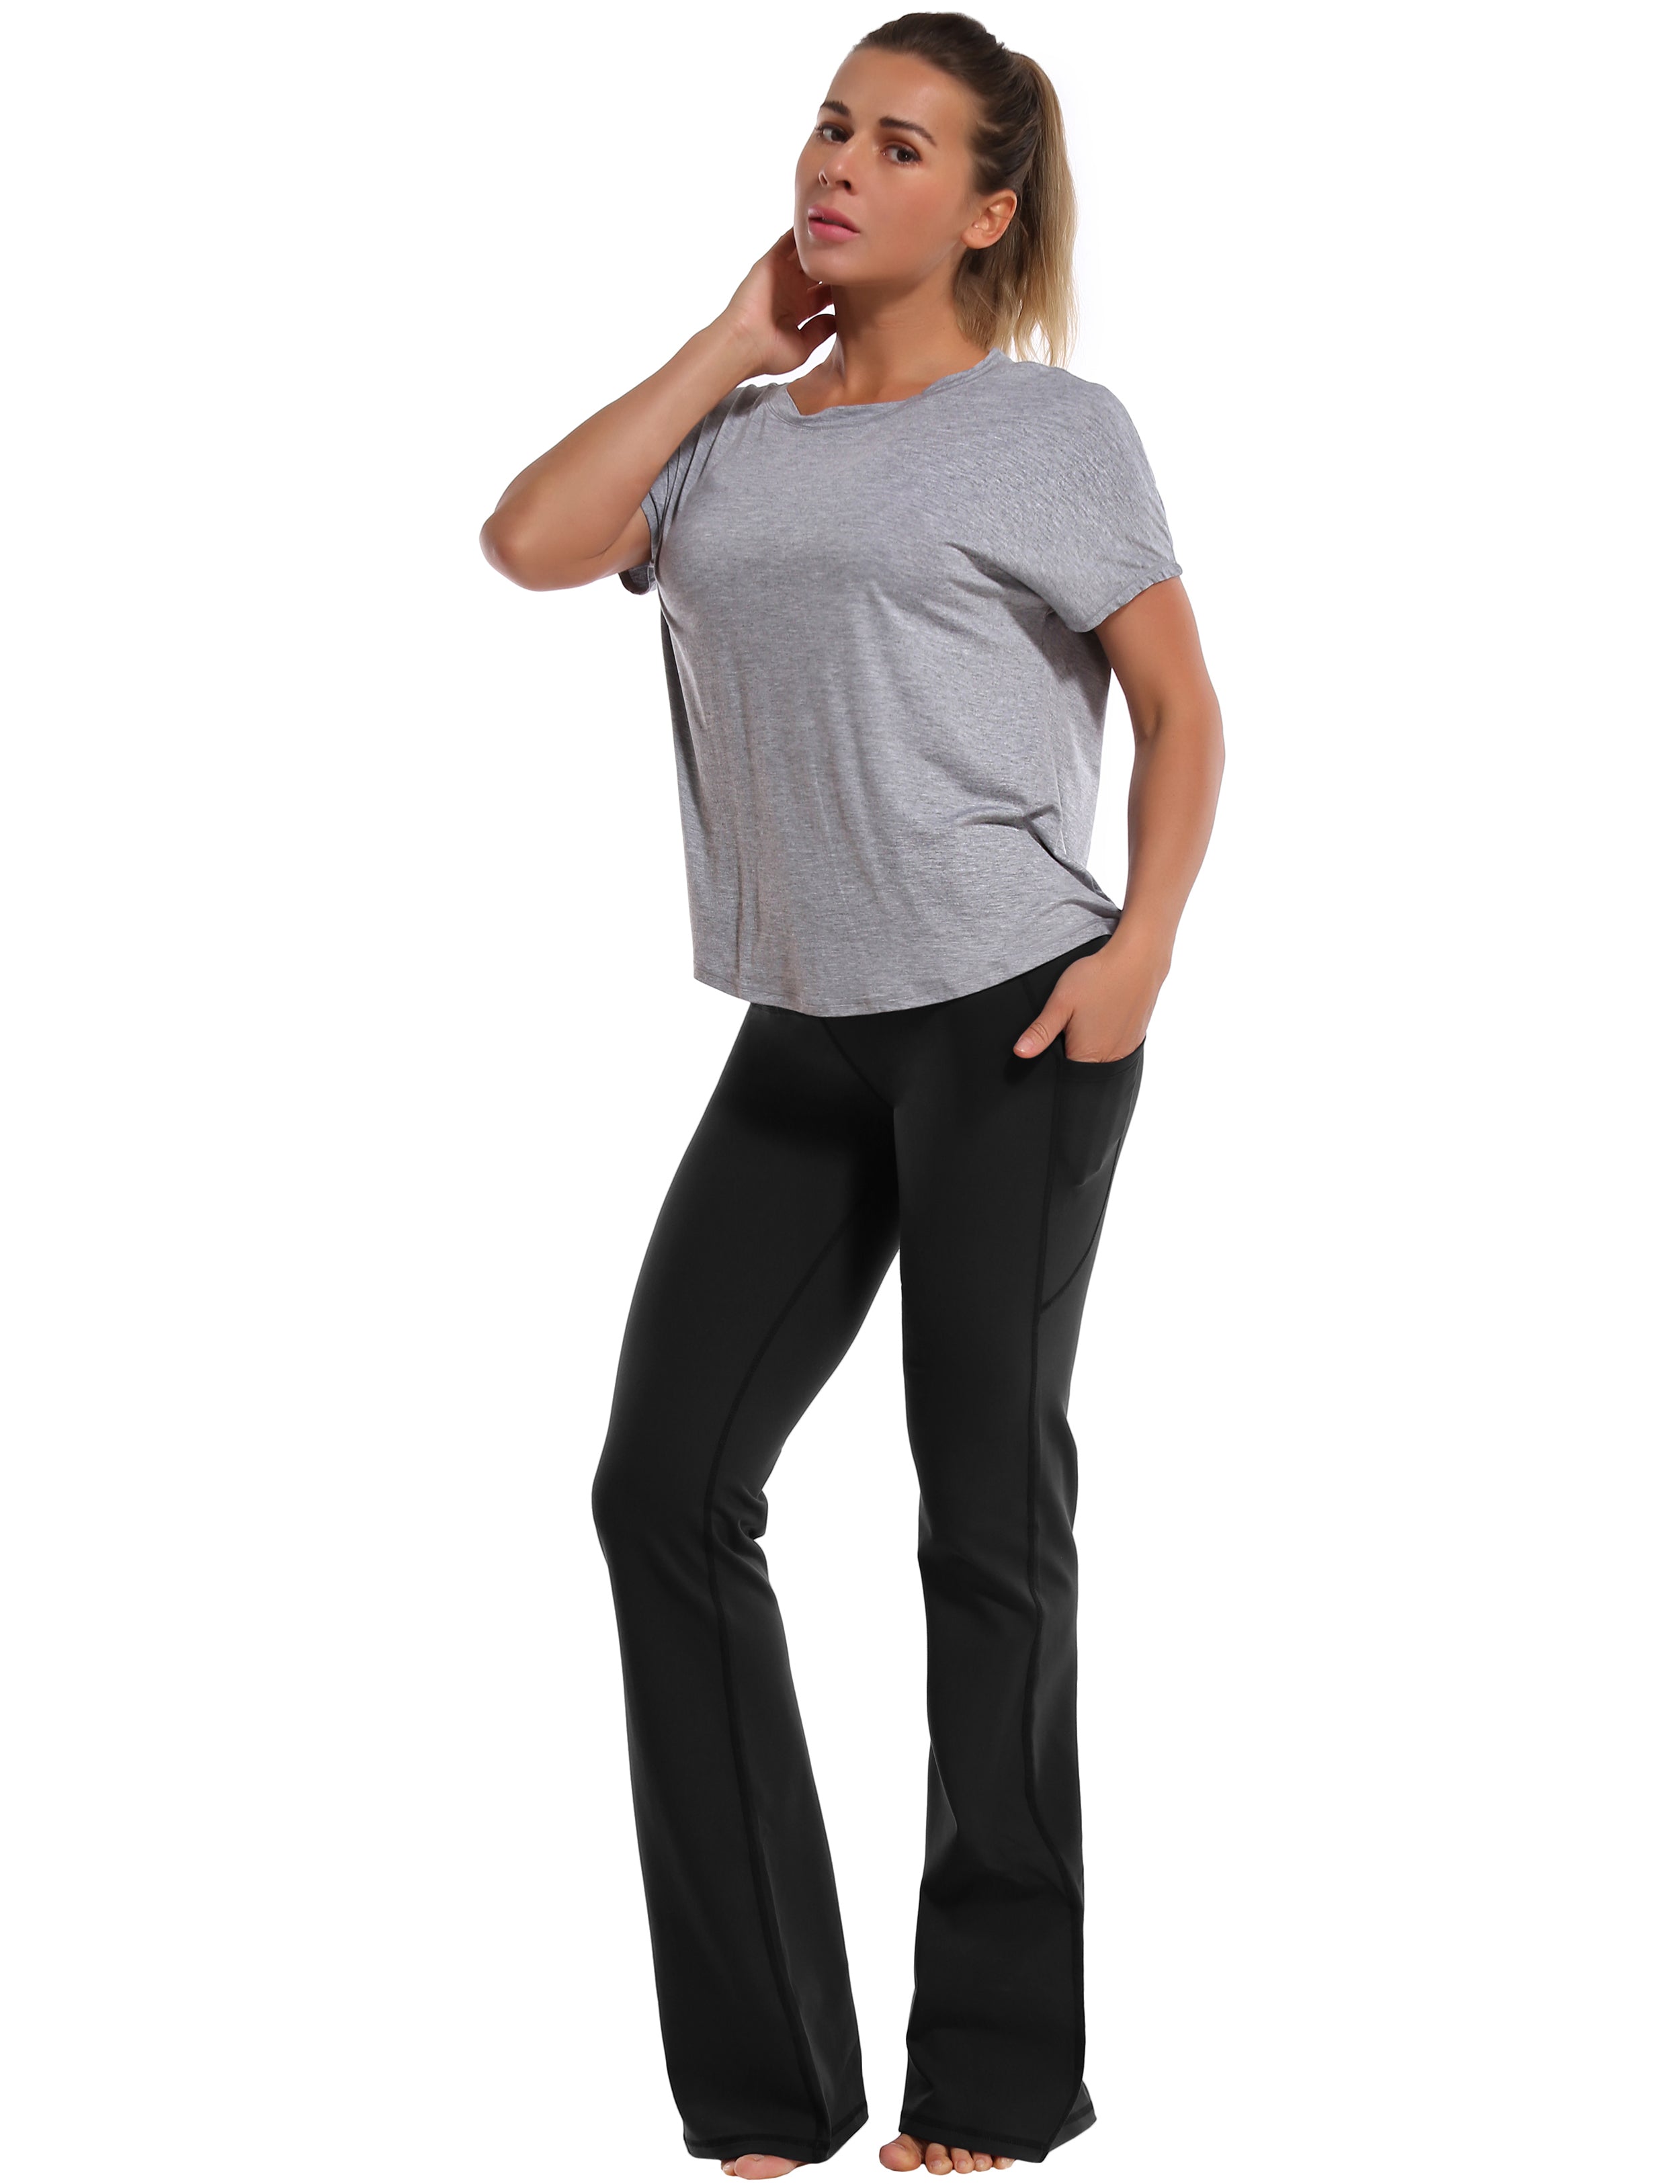 139 Side Pockets Bootcut Leggings black 87%Nylon/13%Spandex Fabric doesn't attract lint easily 4-way stretch No see-through Moisture-wicking Tummy control Inner pocket Four lengths